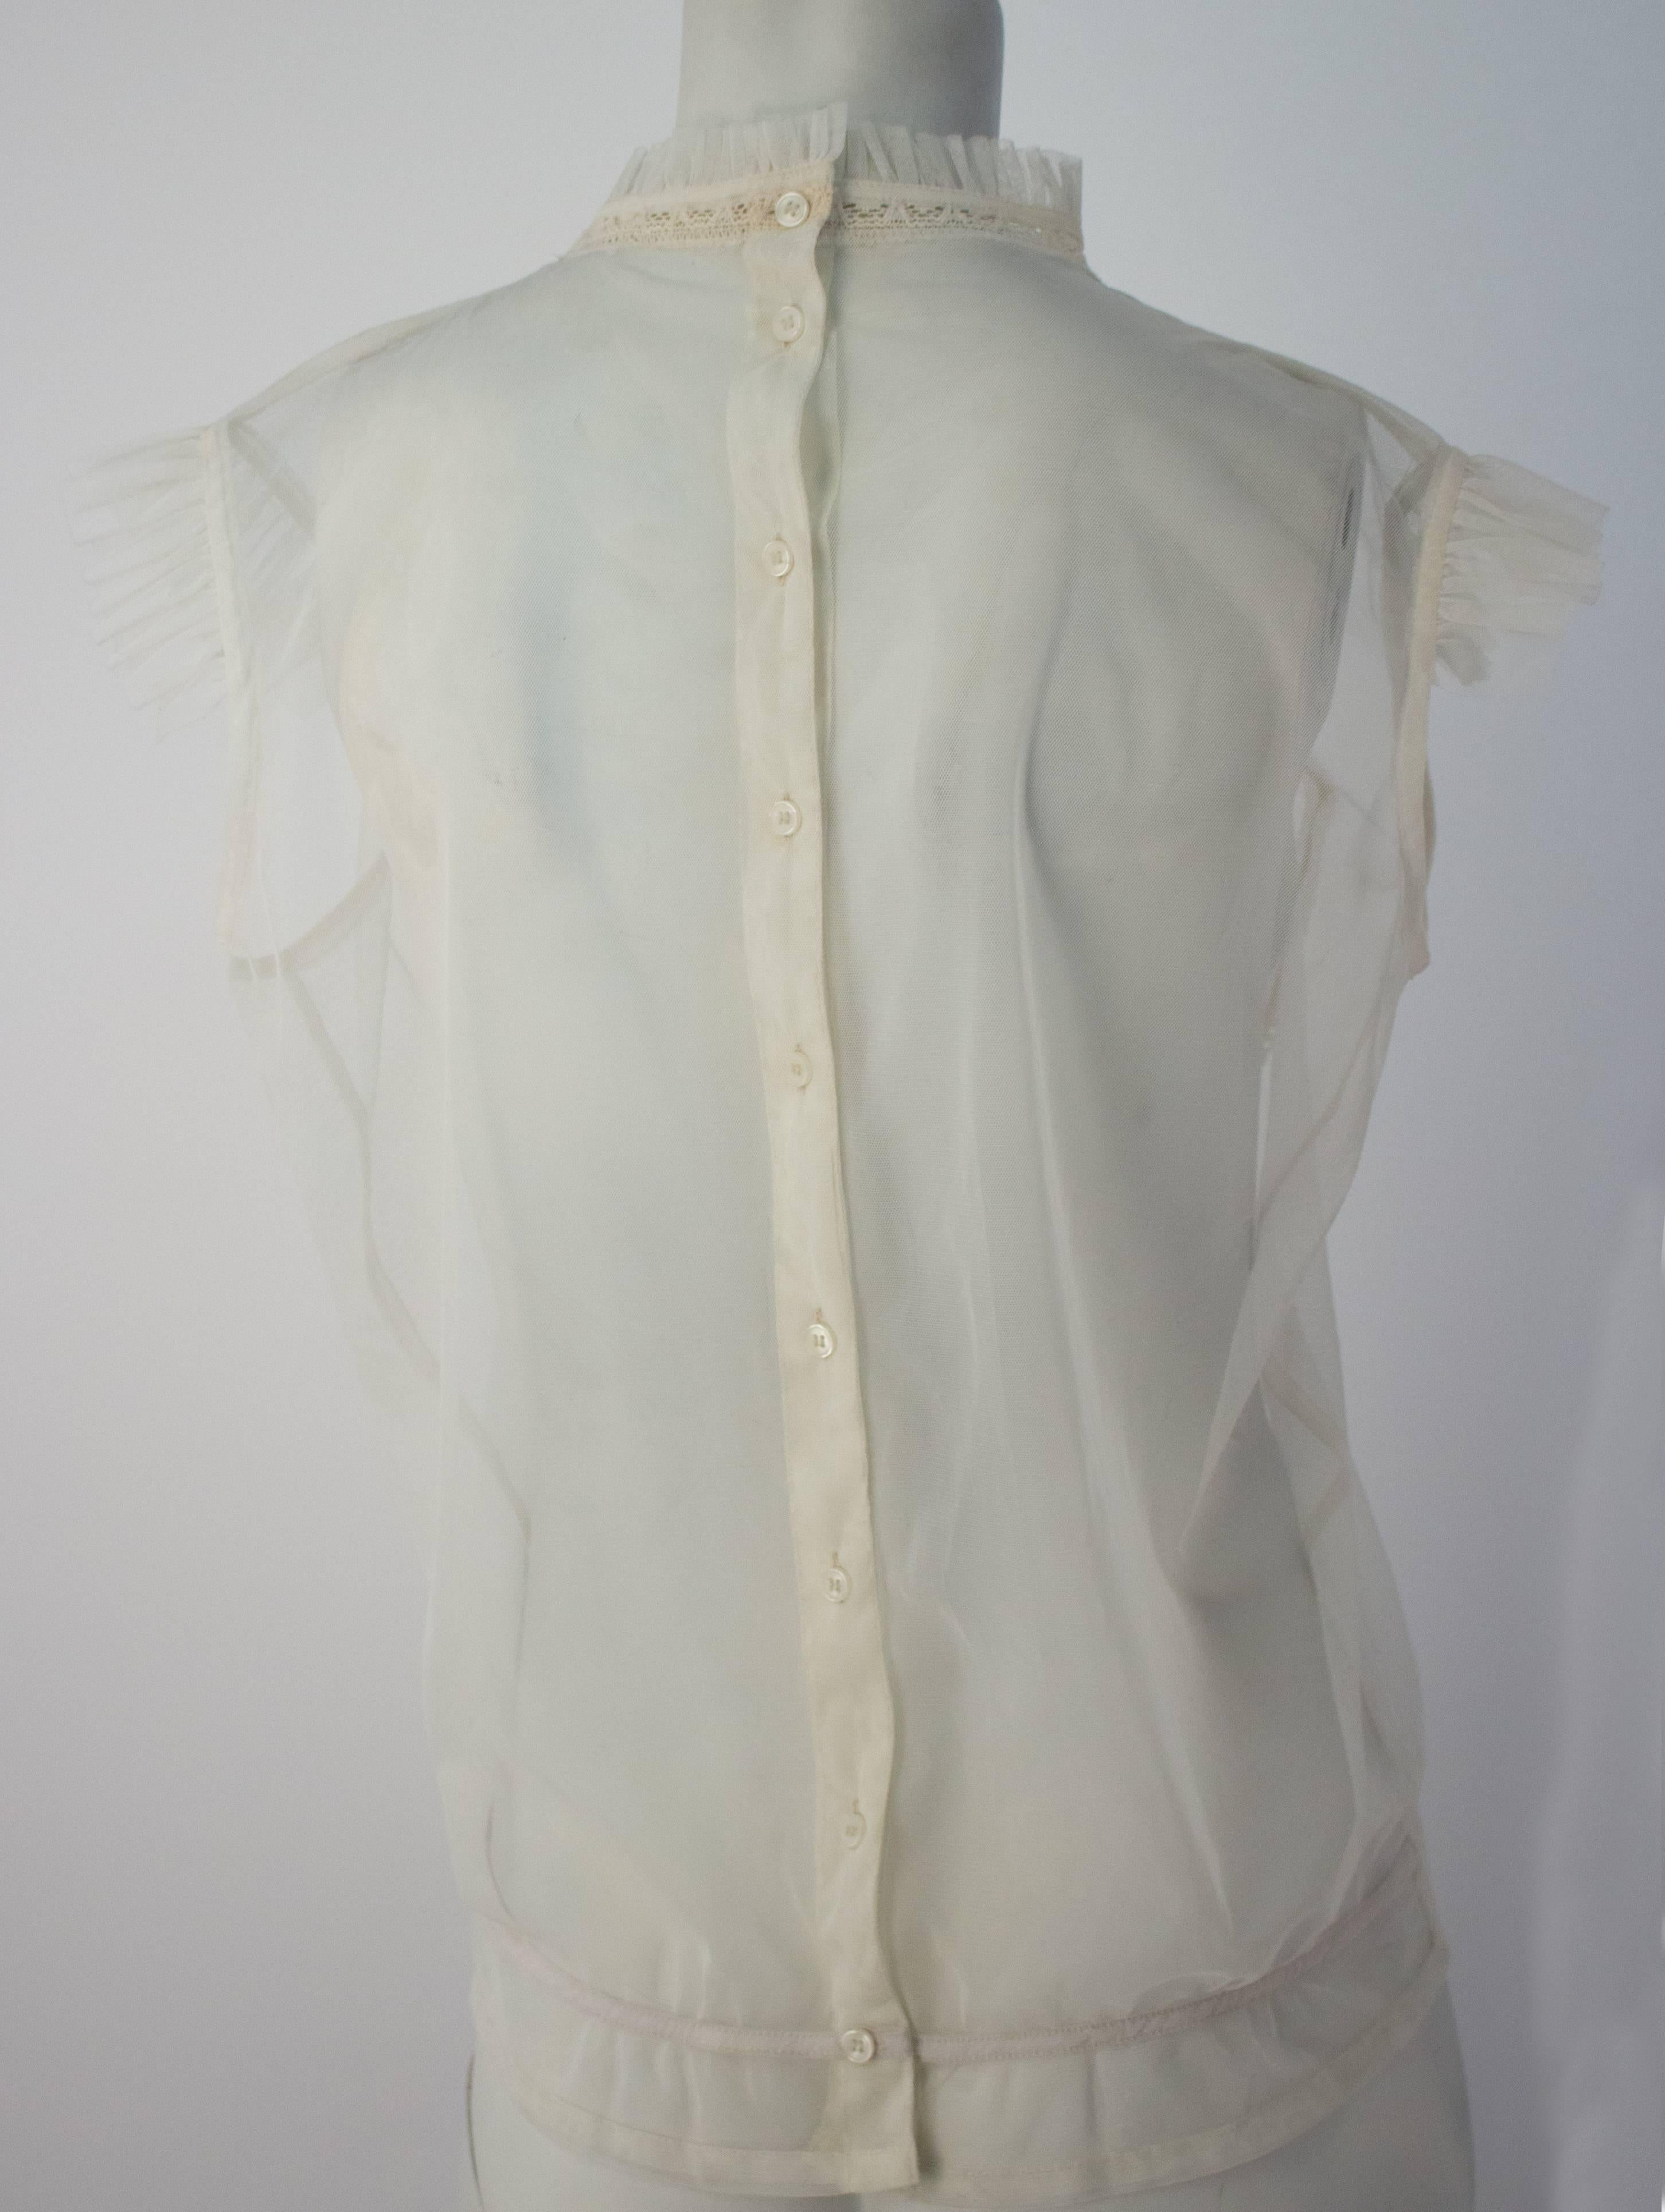 70s Sleeveless Net Blouse with Lace Detail In Excellent Condition For Sale In San Francisco, CA